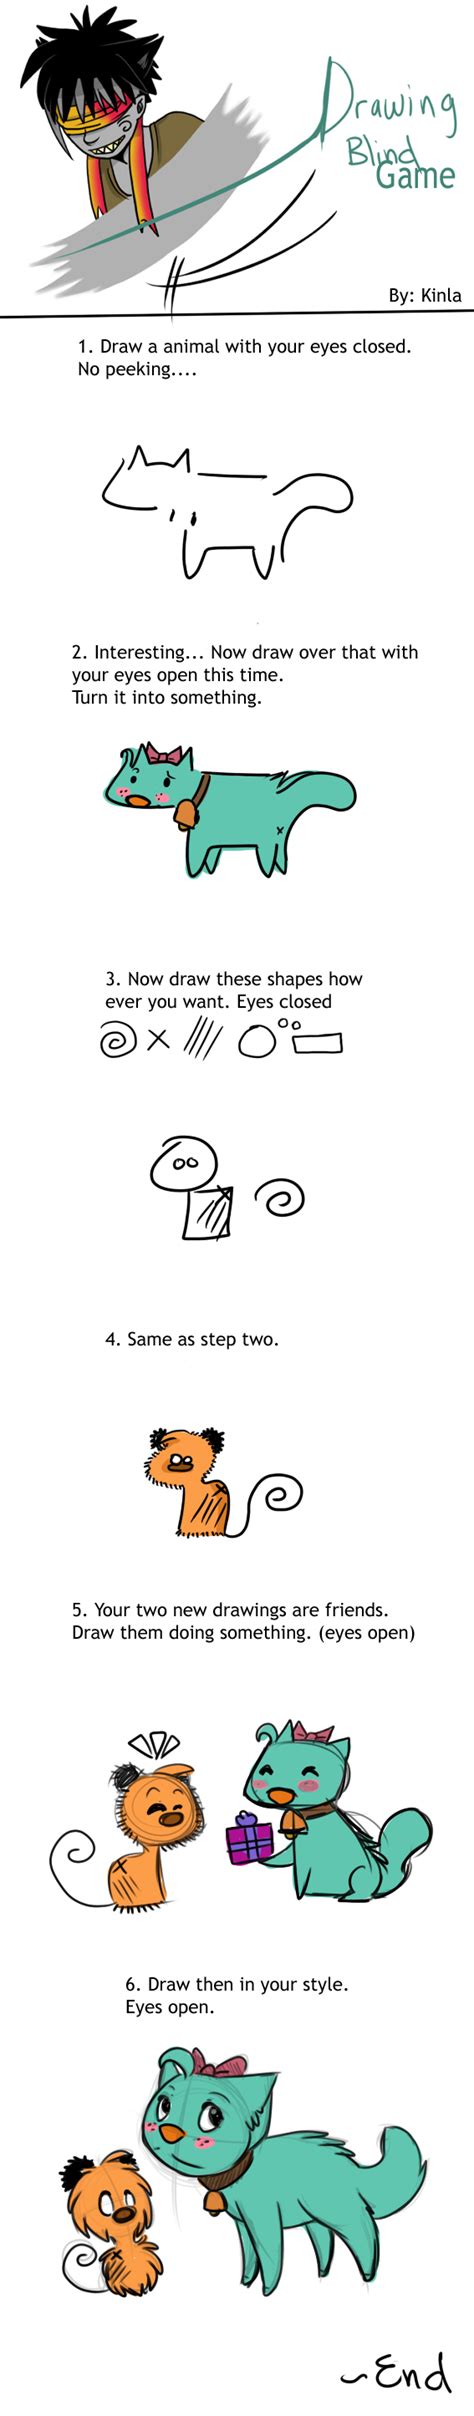 How to play the blind drawing game. Drawing Blind Game by Kinla on DeviantArt